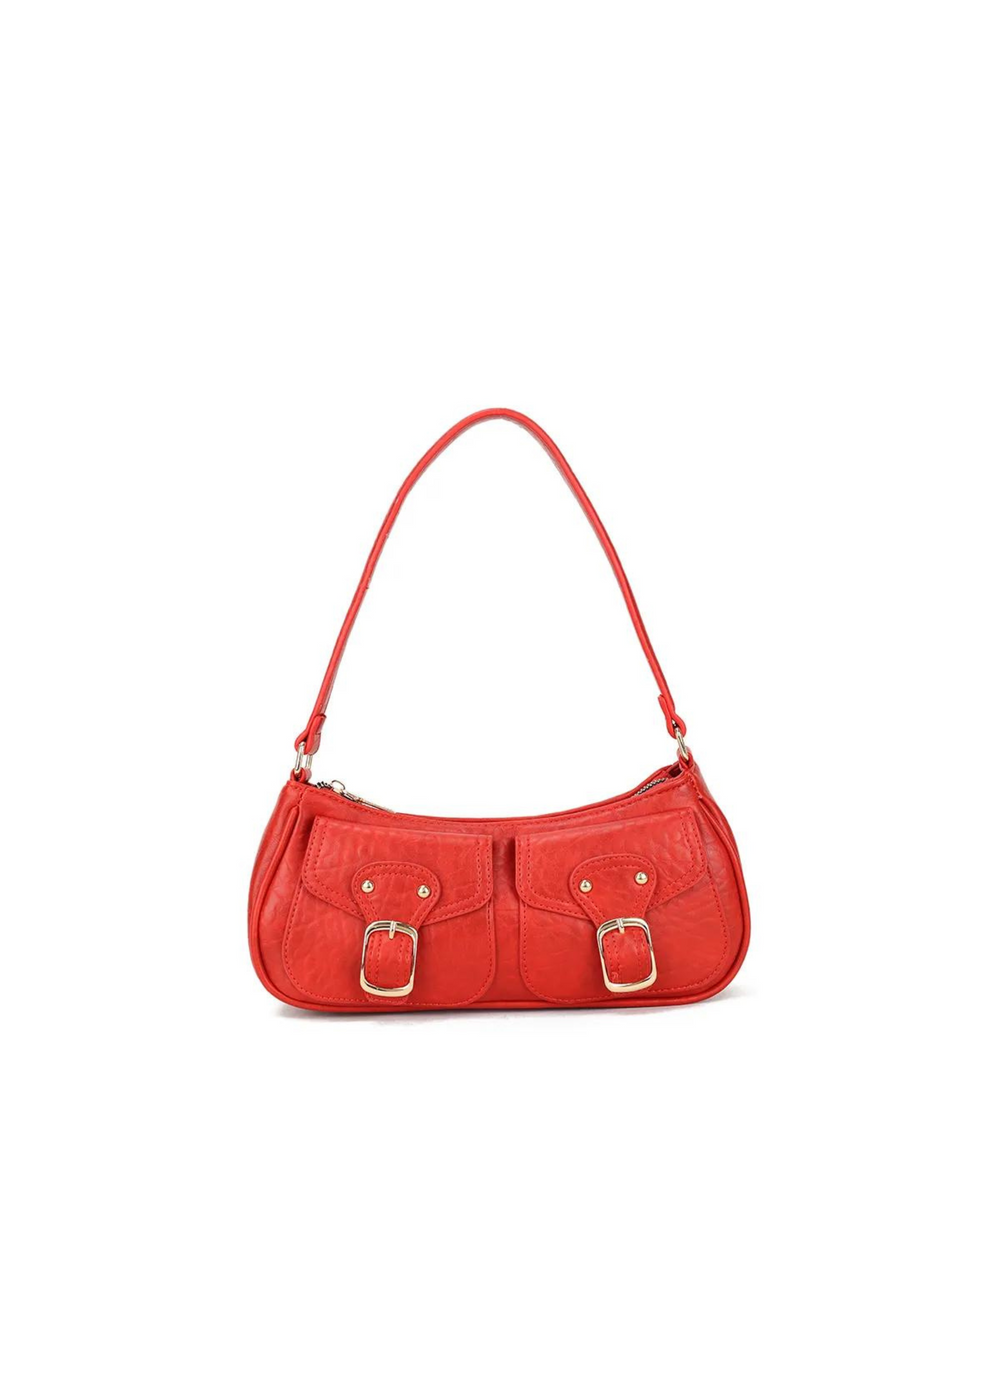 BENNE SATCHEL WITH GOLD BUCKLES IN RED FAUX LEATHER